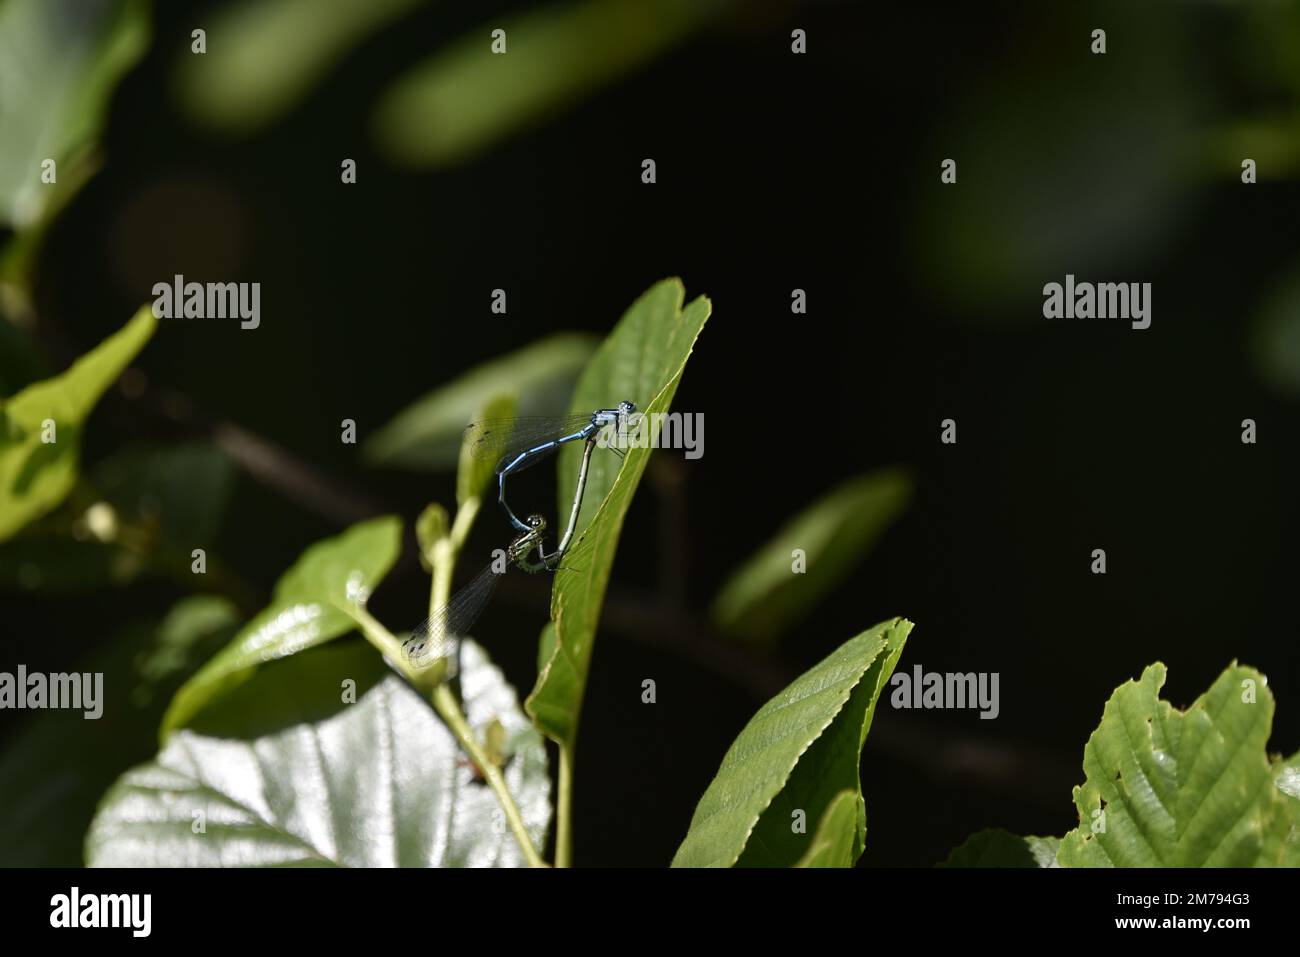 Mating Pair of Azure Damselflies (Coenagnon puella) Forming Mating Wheel to Left of Image on Sunlit Green Leaf in July in Wales, UK Stock Photo